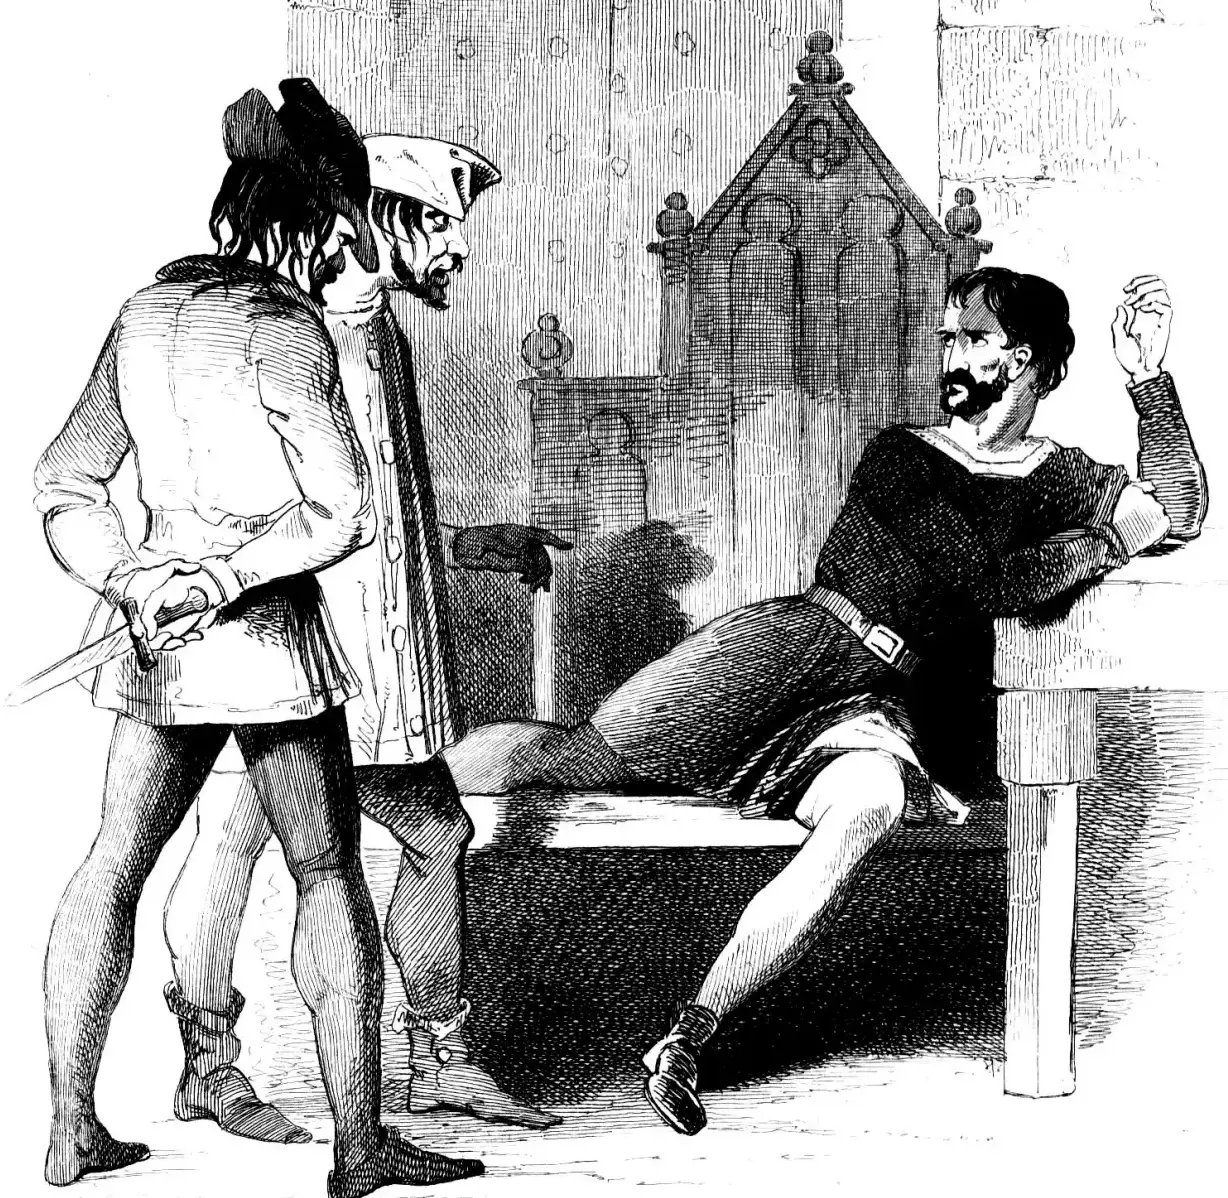 A man sits on a throne, looking suspicious at two people who approach, one with a knife behind his back